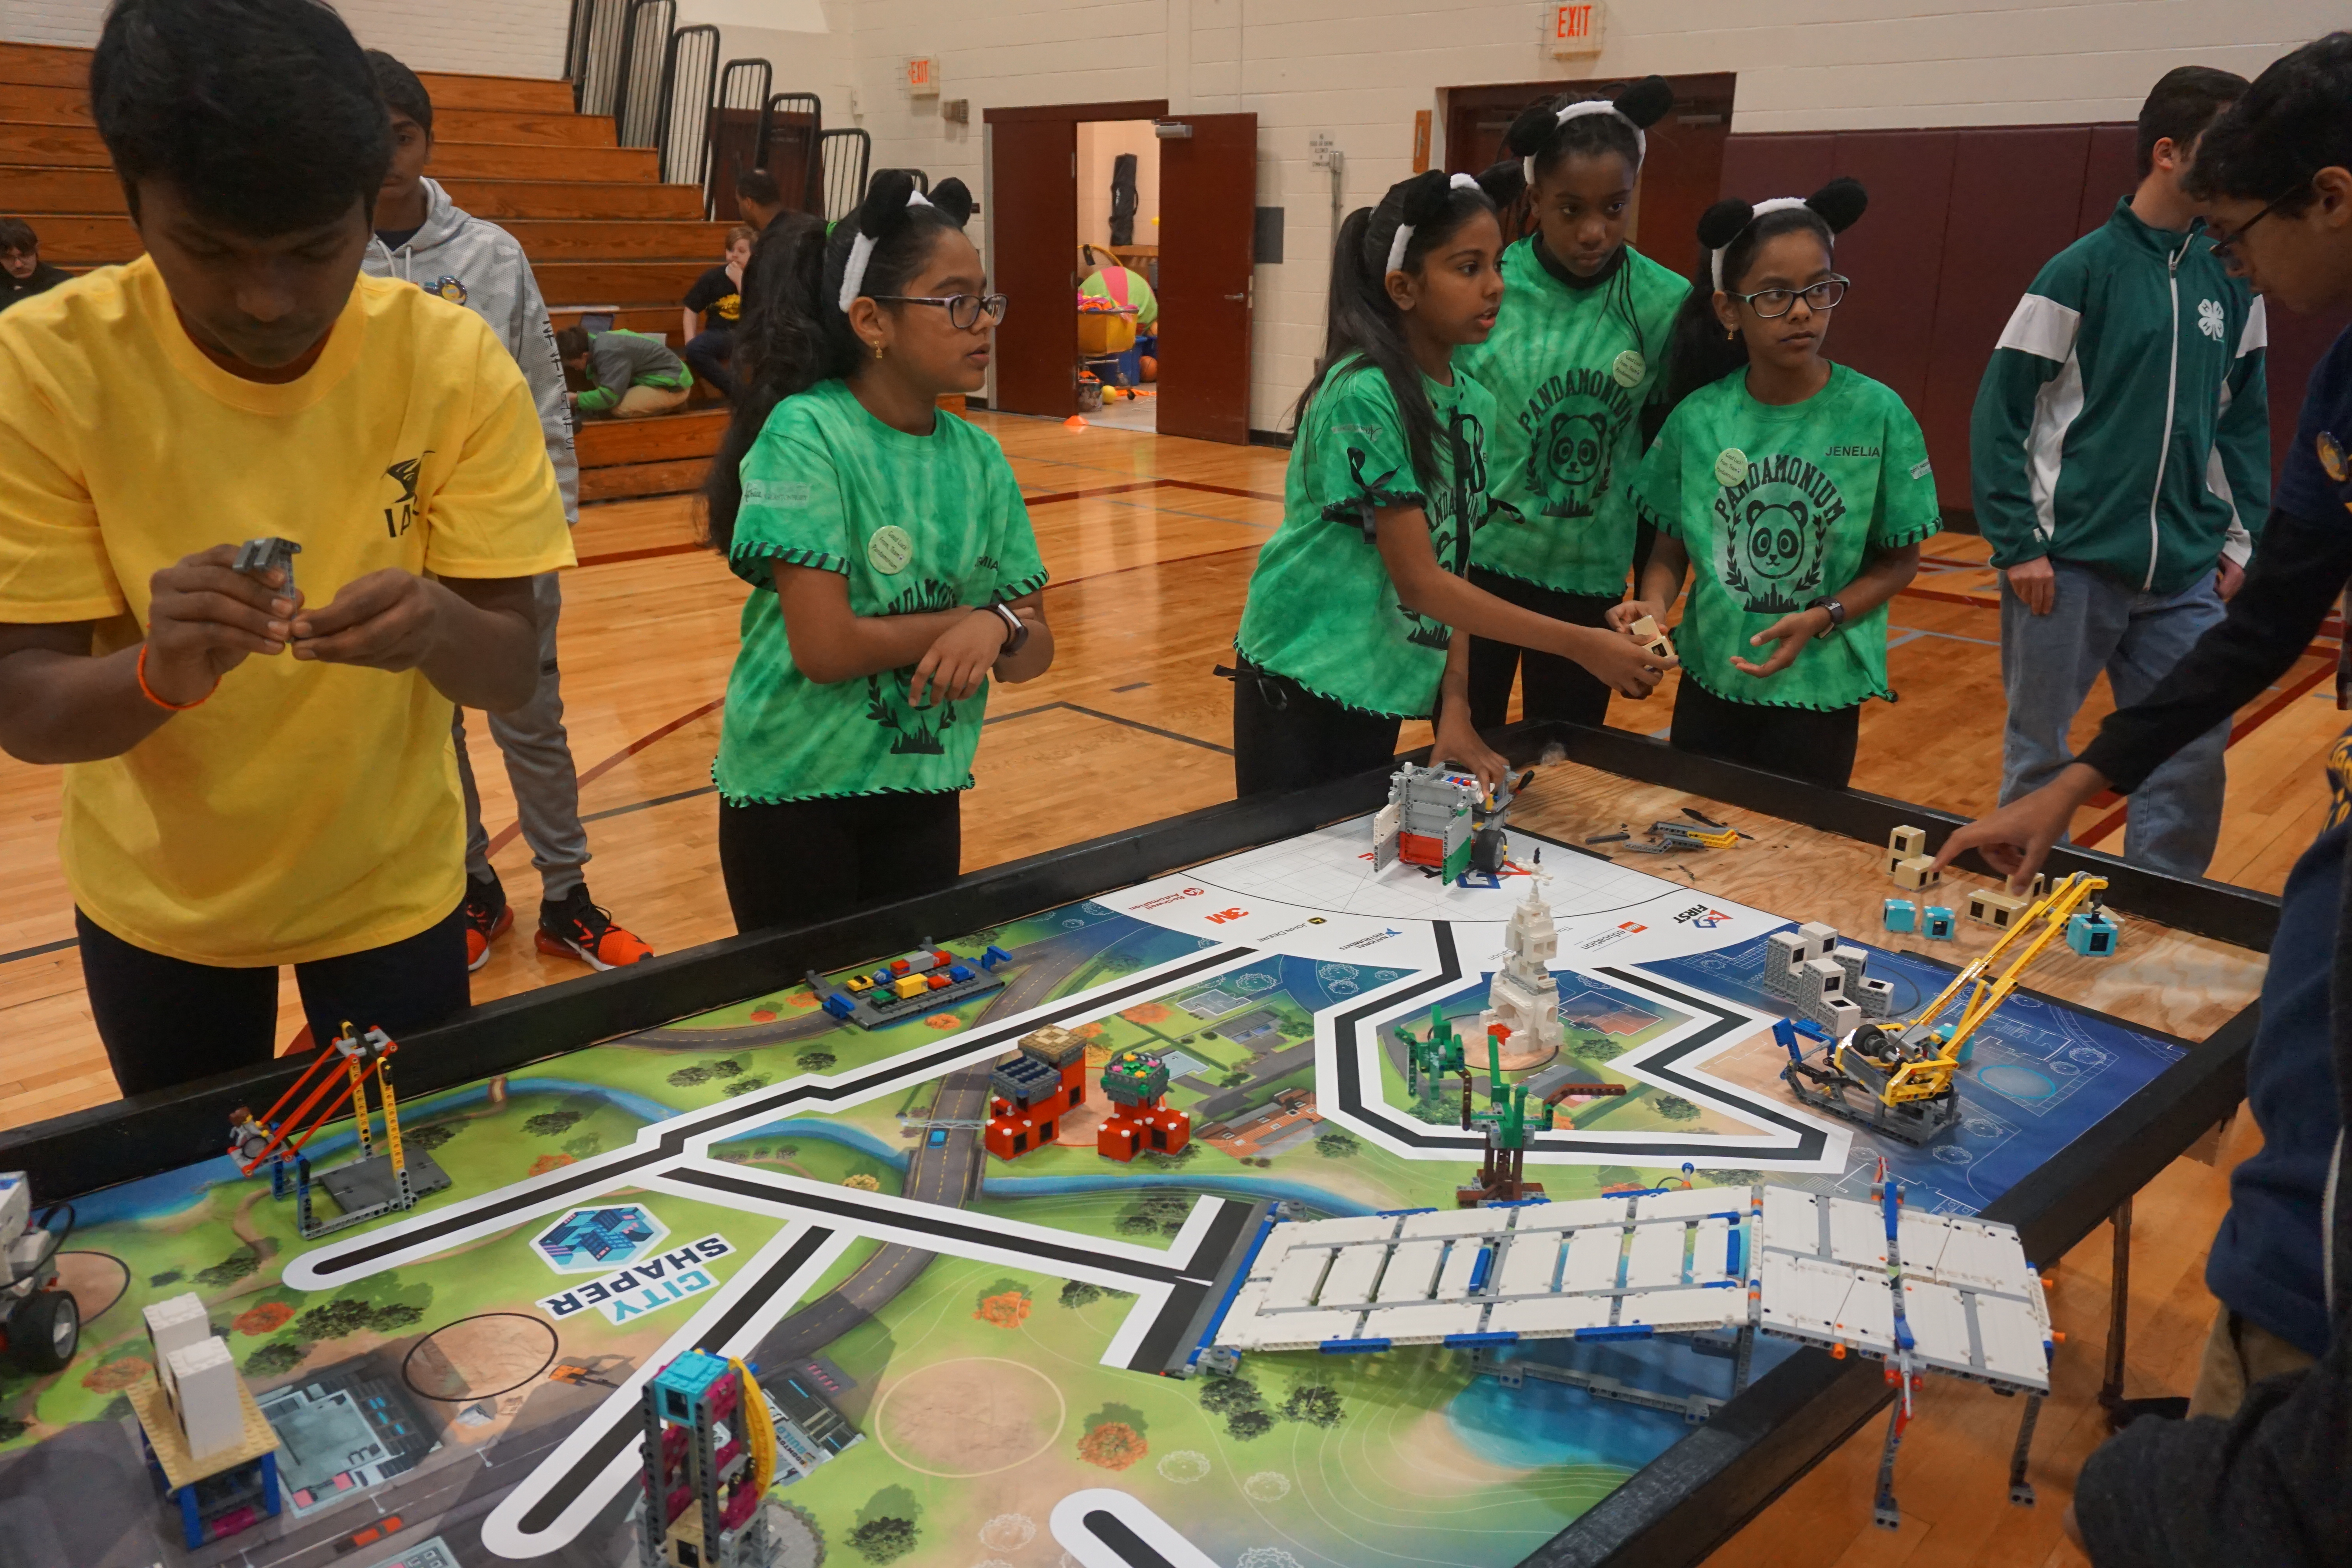 FLL teams competing at our 2019 FLL Qualifier